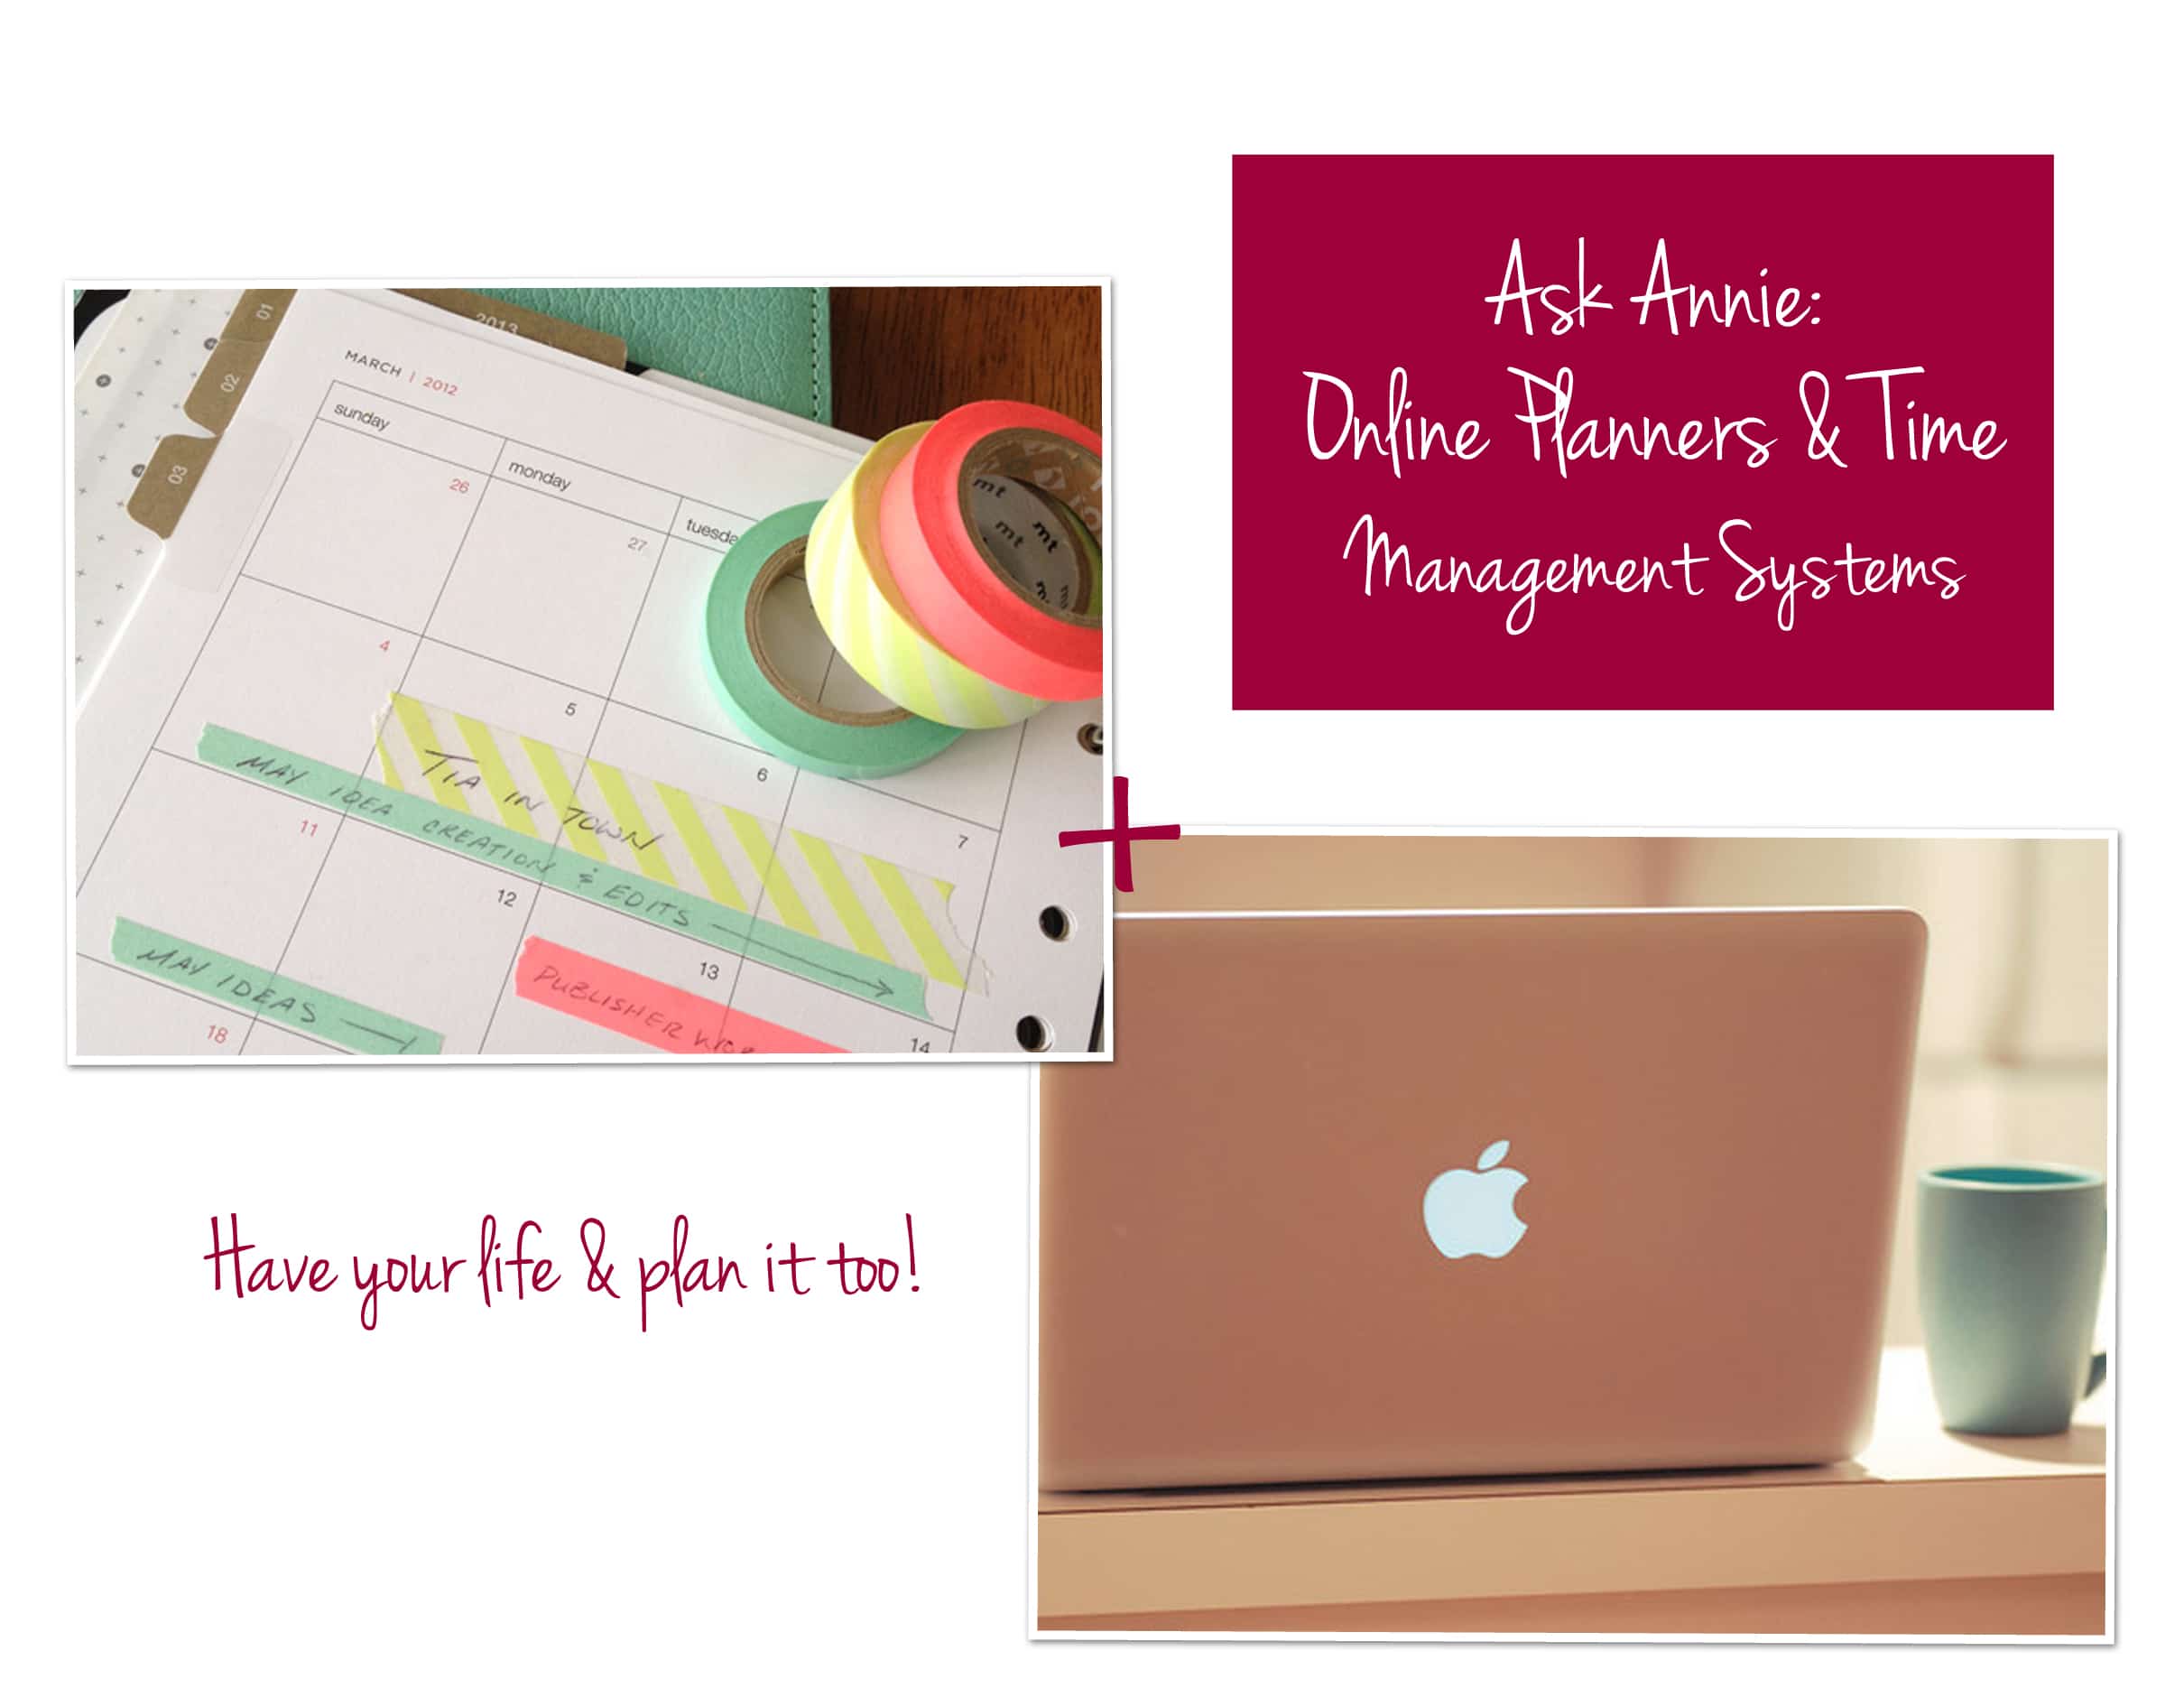 Ask-Annie-Online-Planners-and-Time-Management-Systems